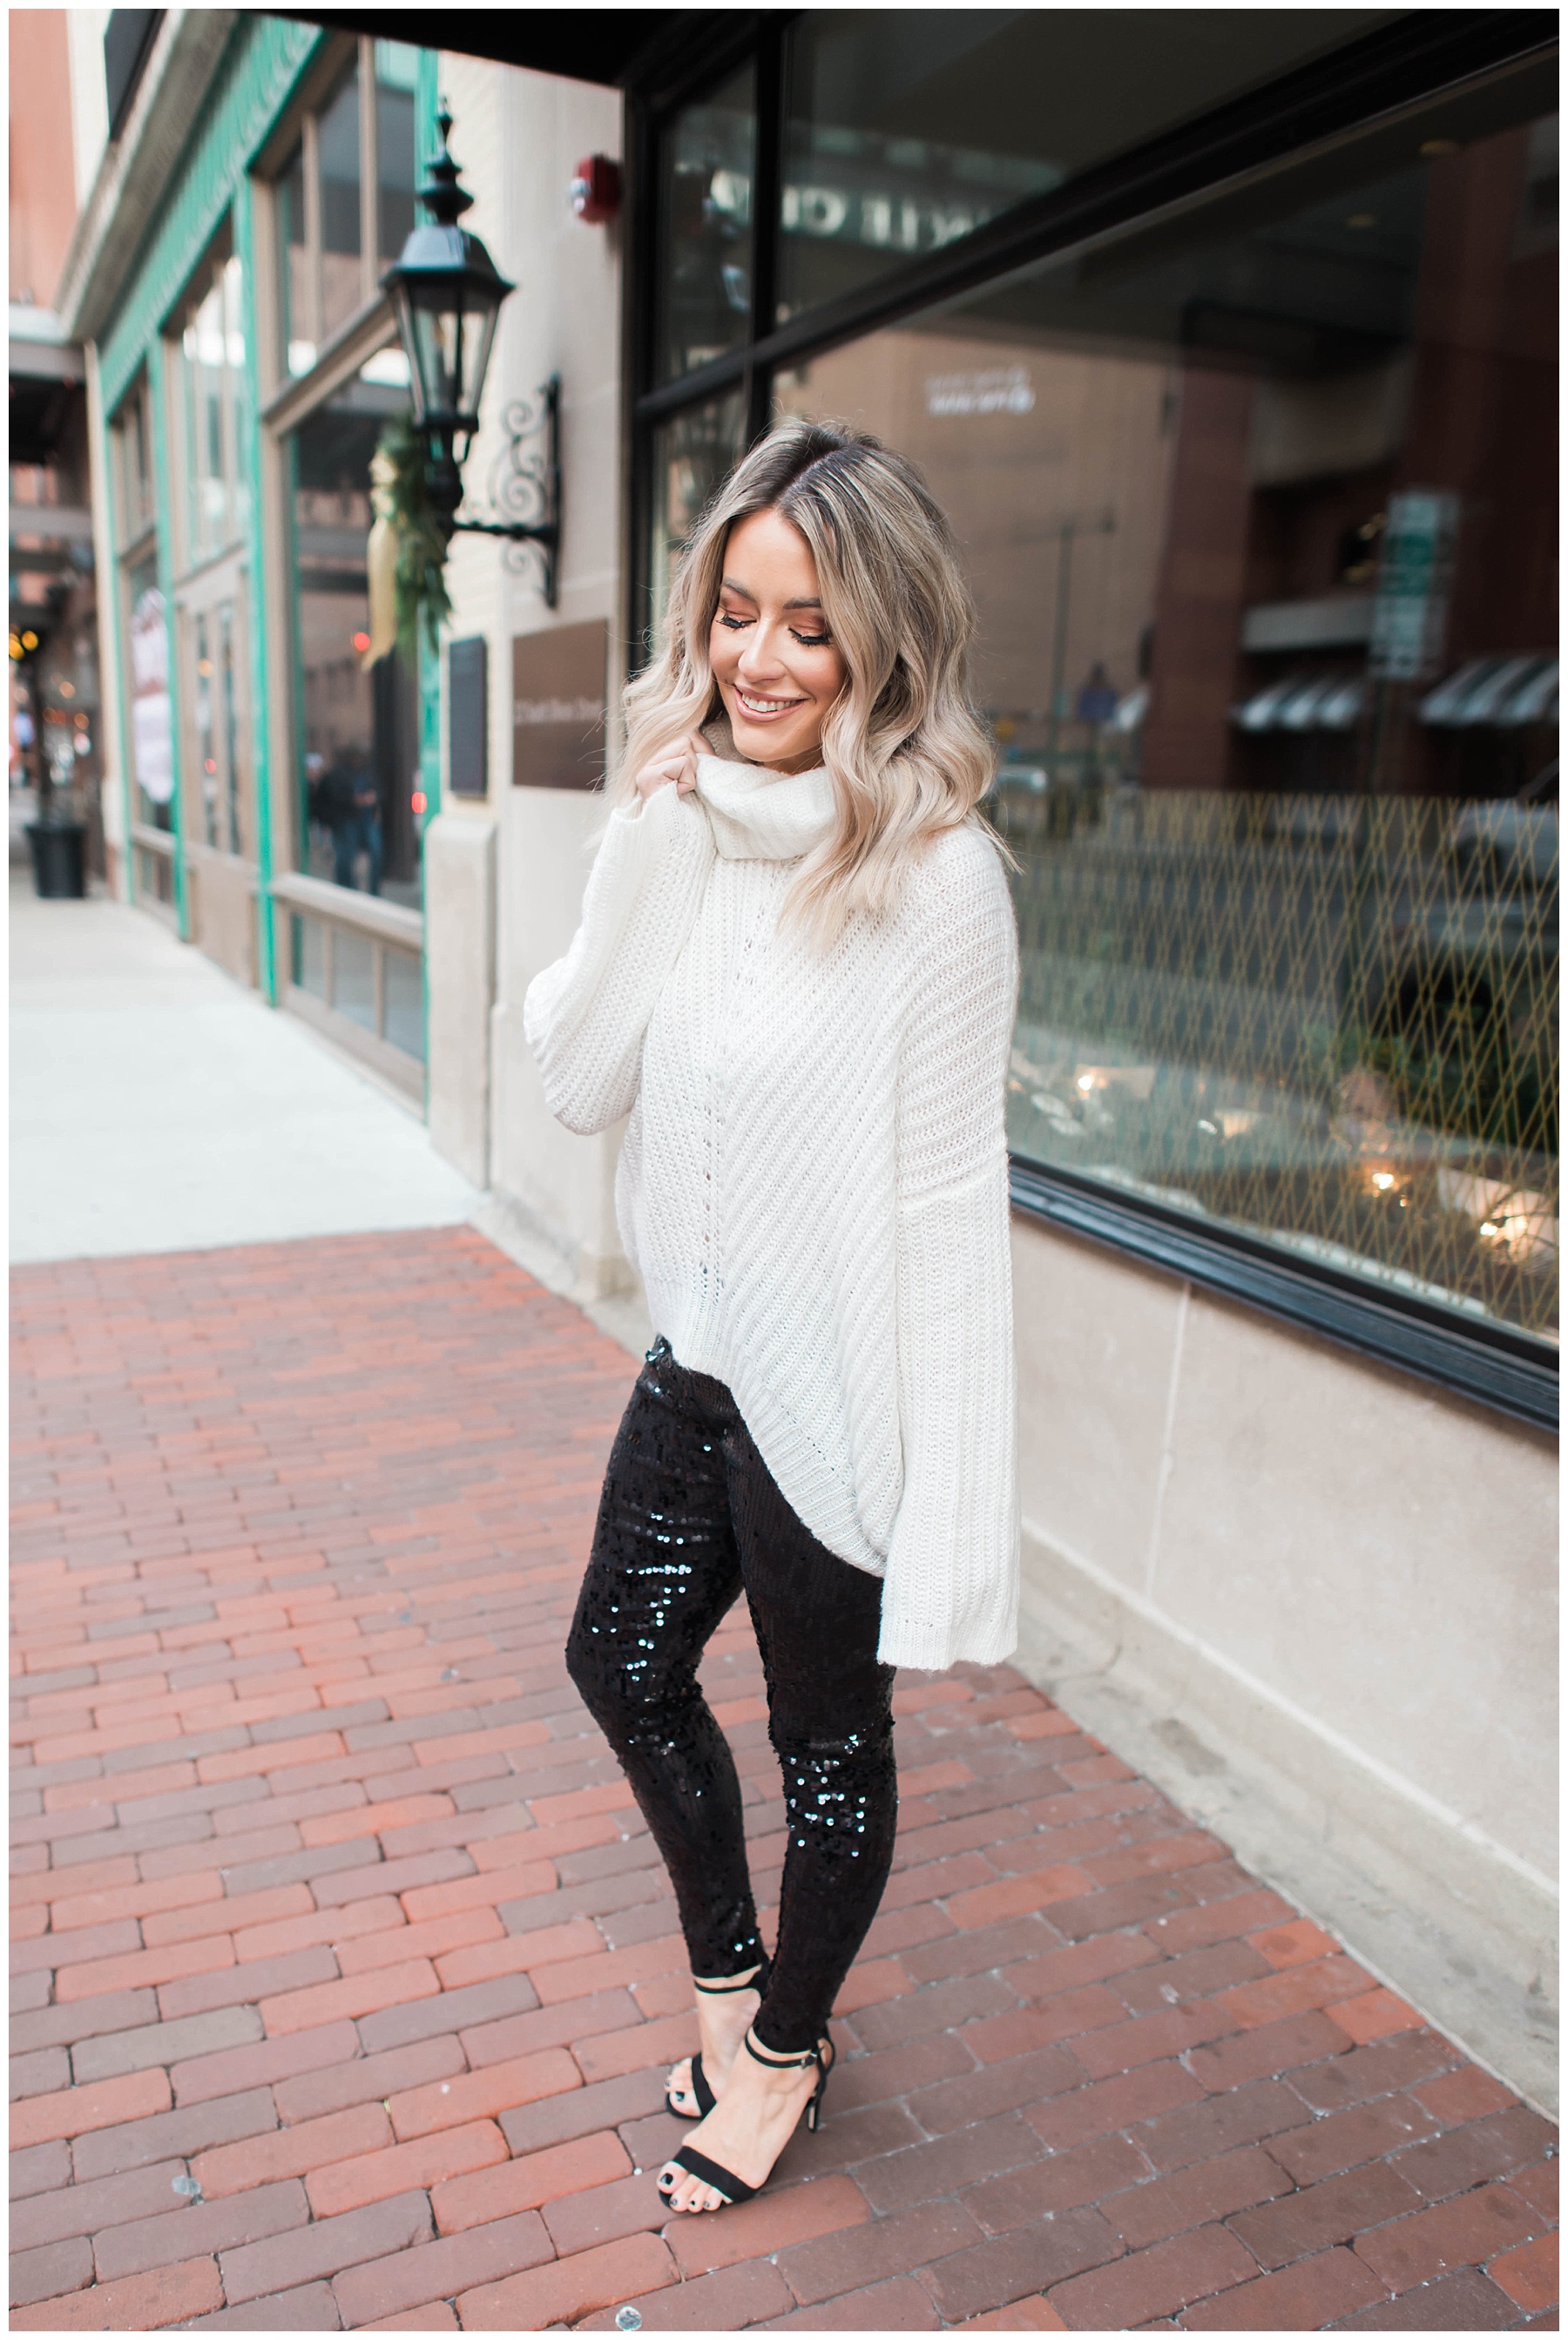 I've got my party pants on | A holiday look with Express